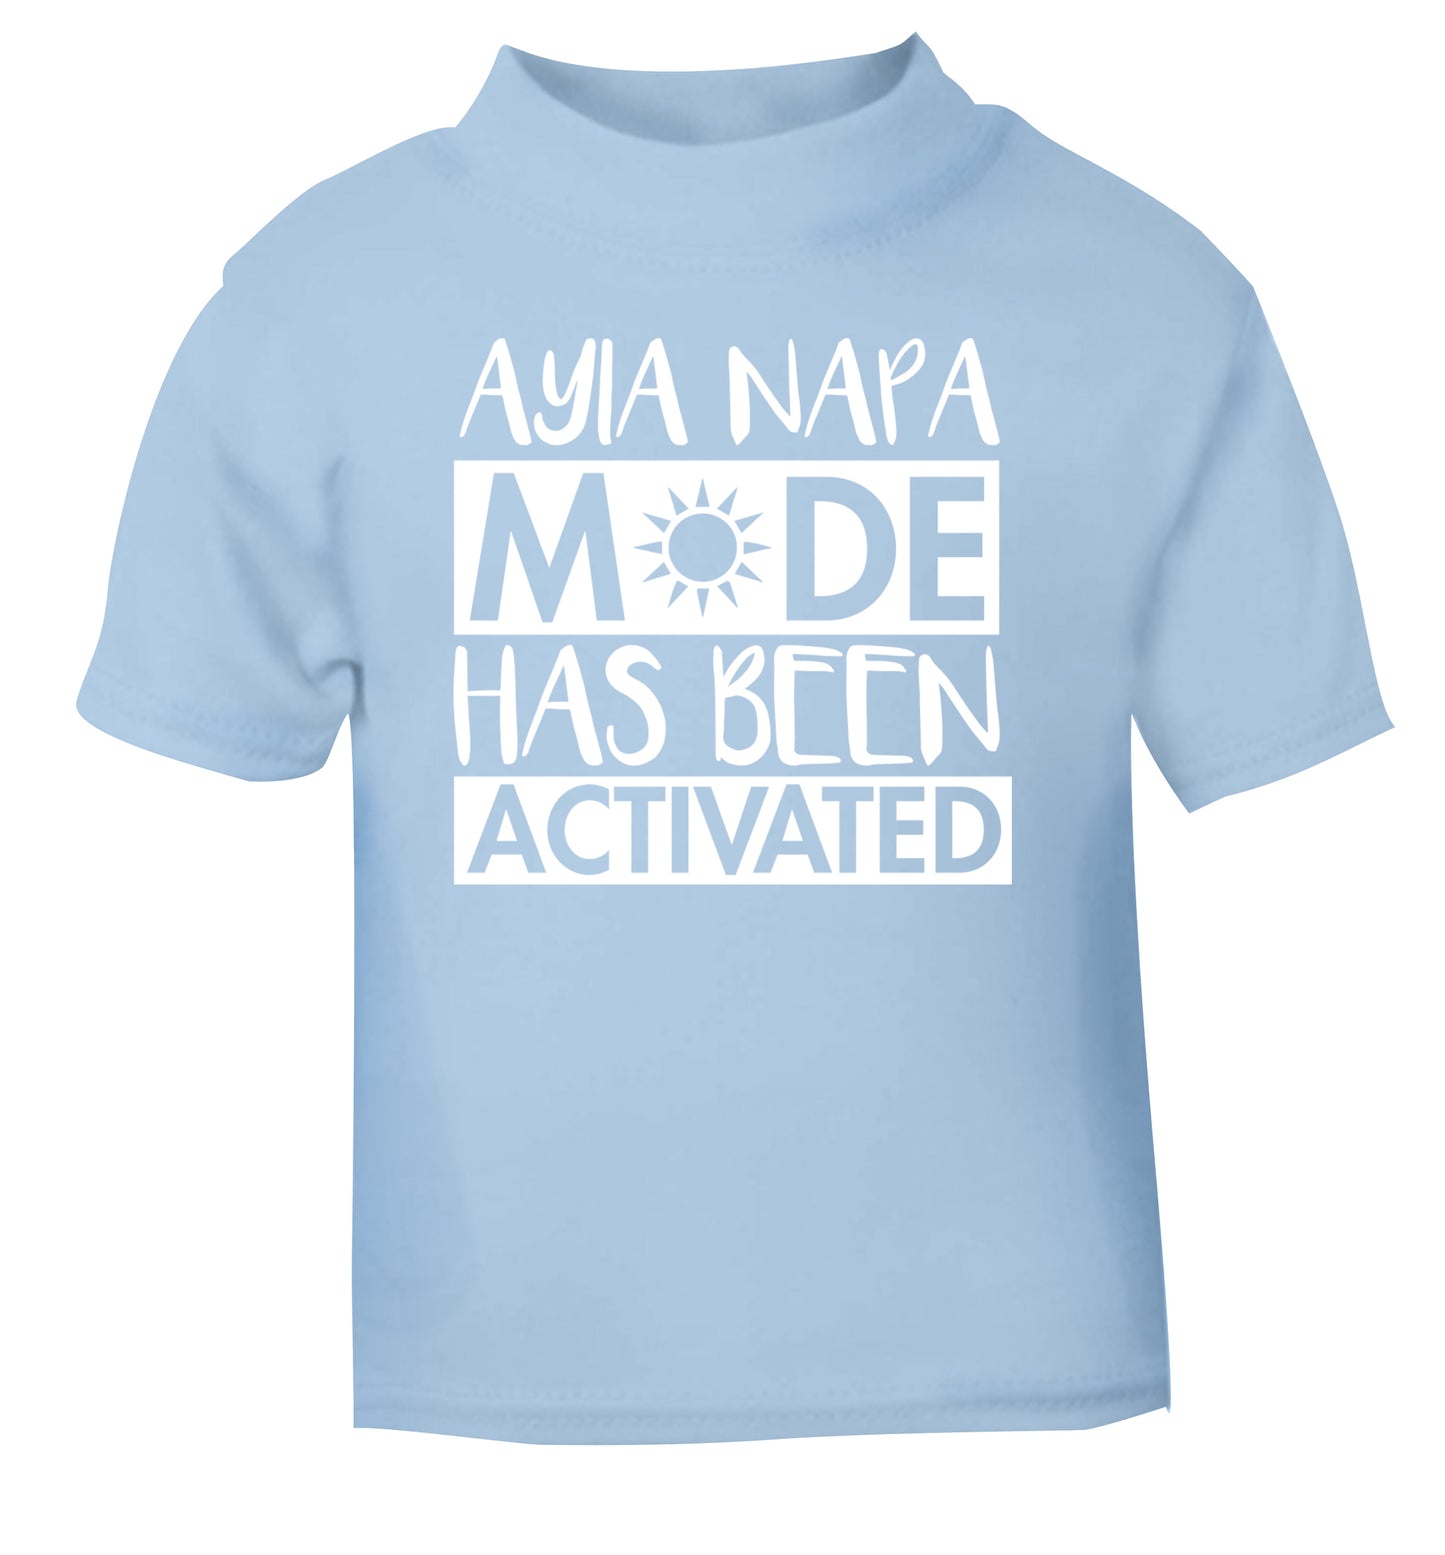 Ayia Napa mode has been activated light blue Baby Toddler Tshirt 2 Years